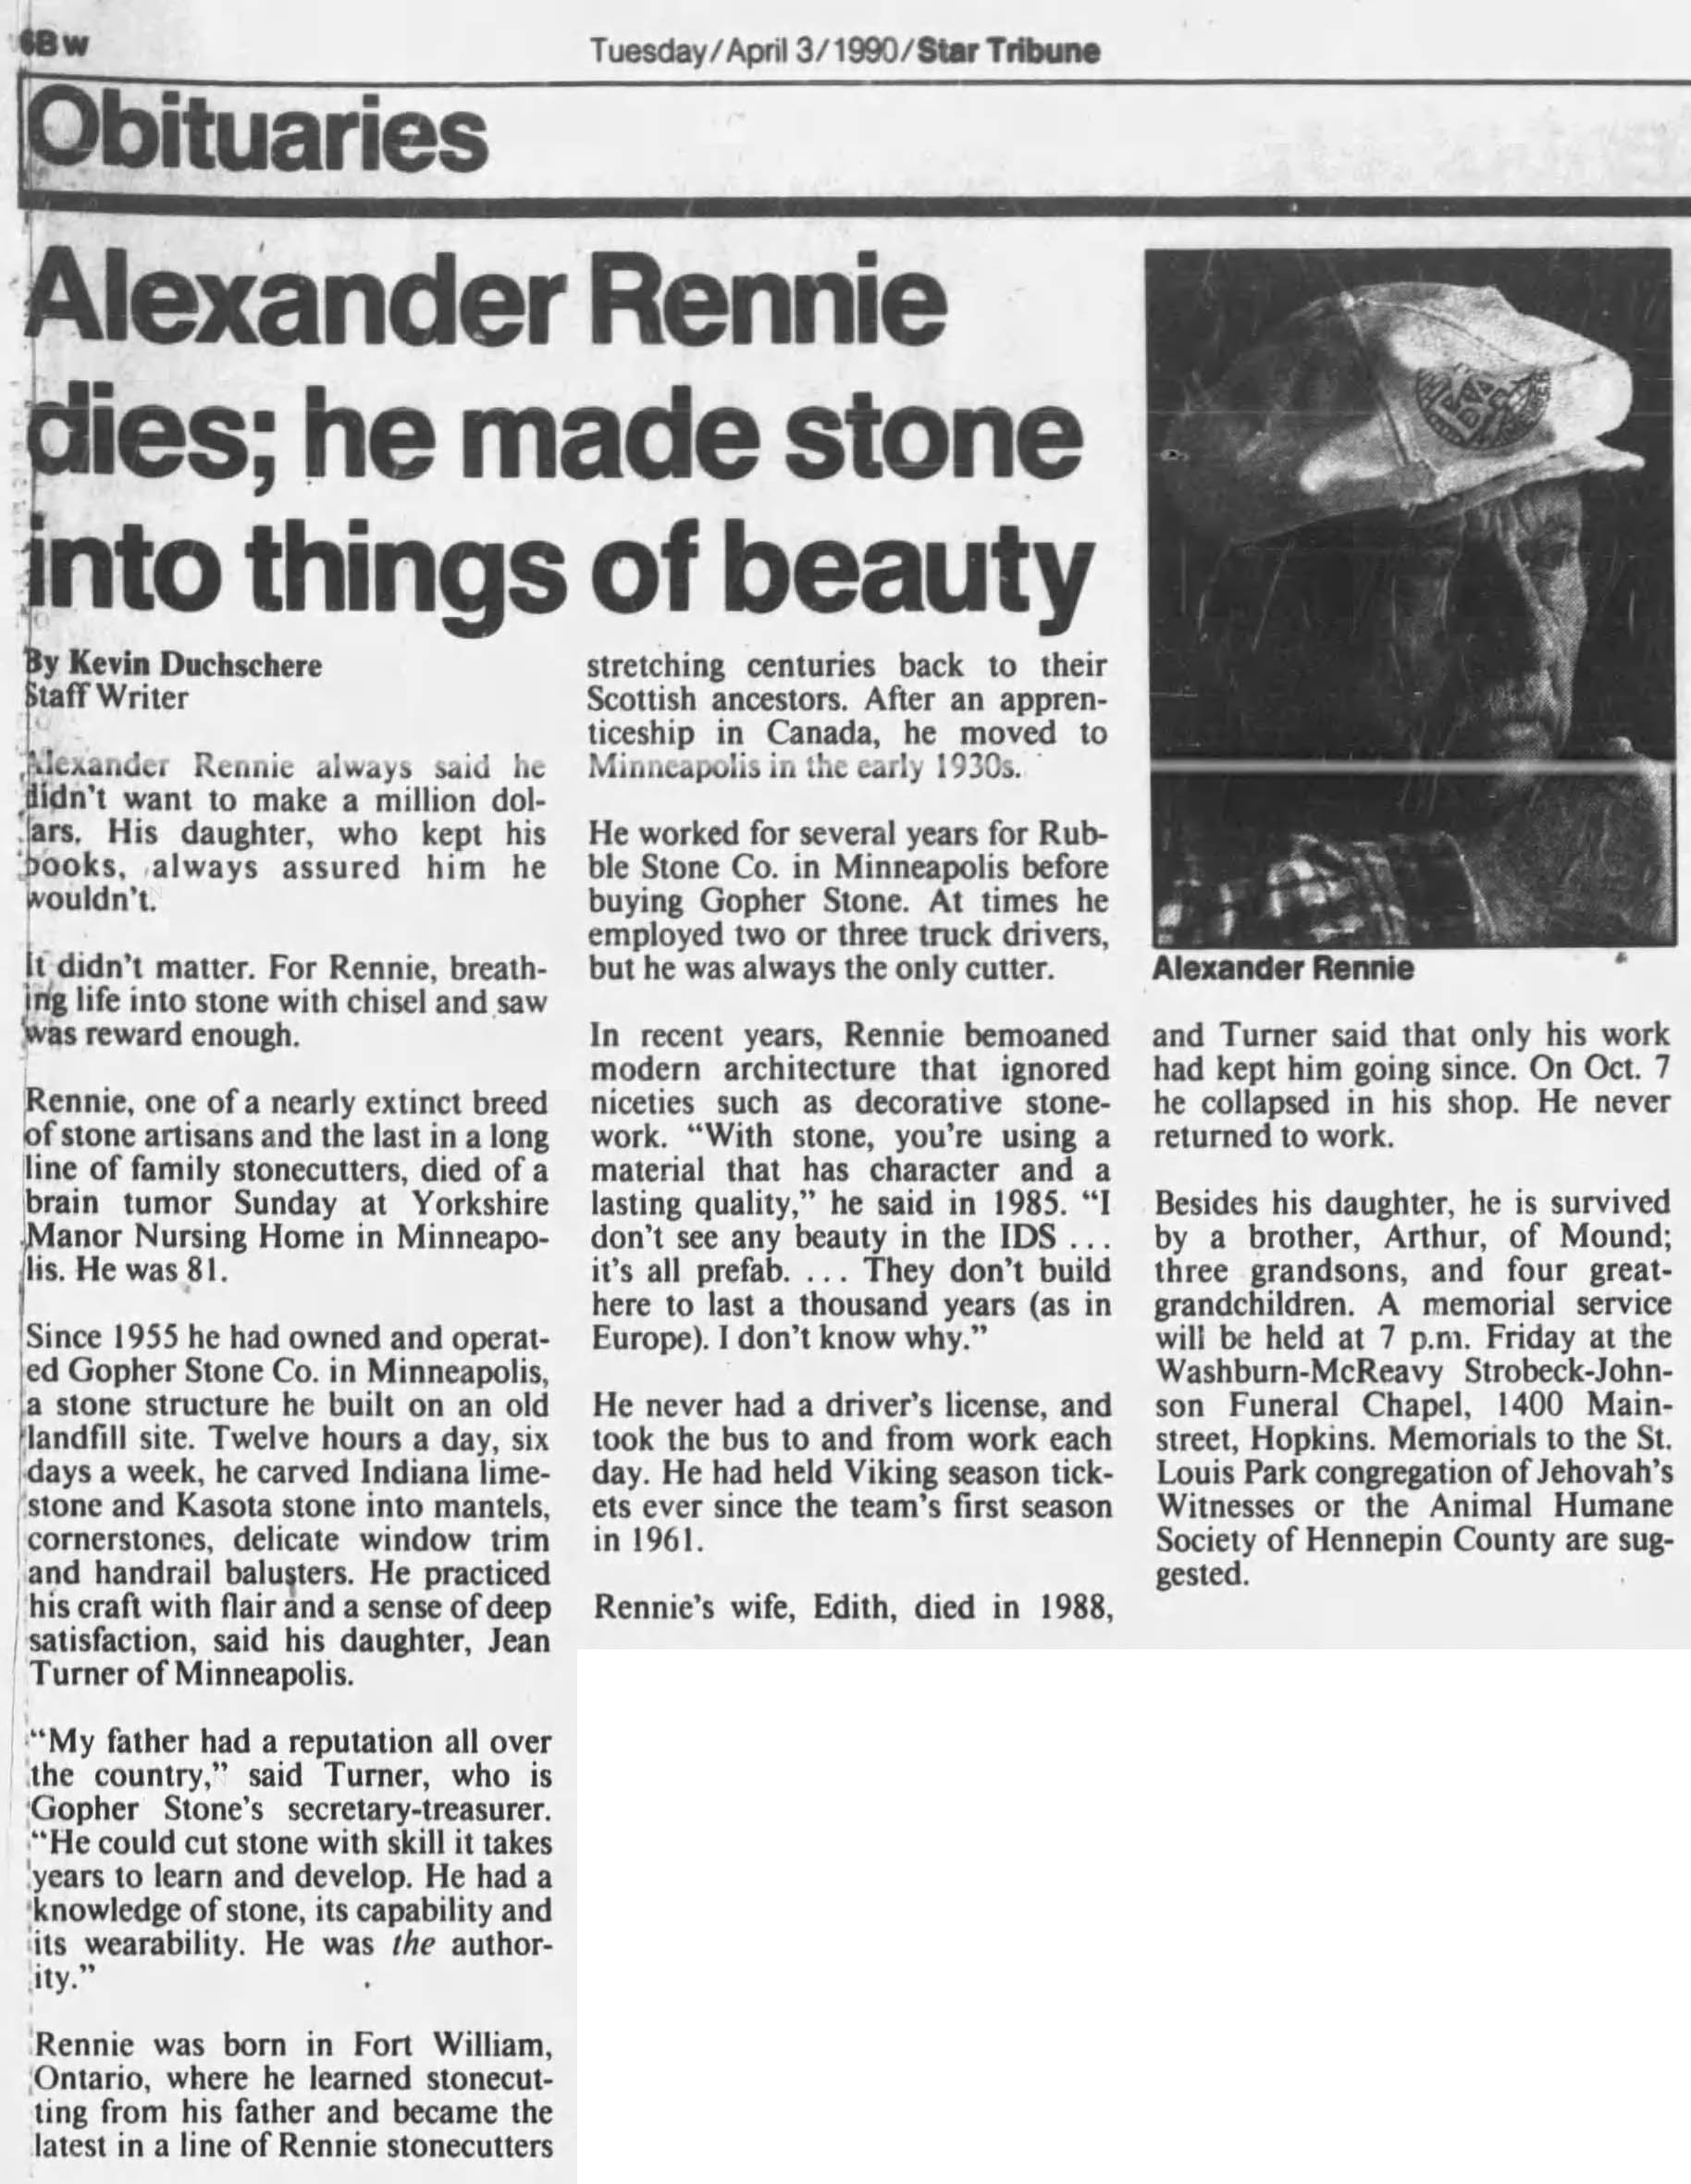  sourced from Alexander Rennie 1990 obituary.